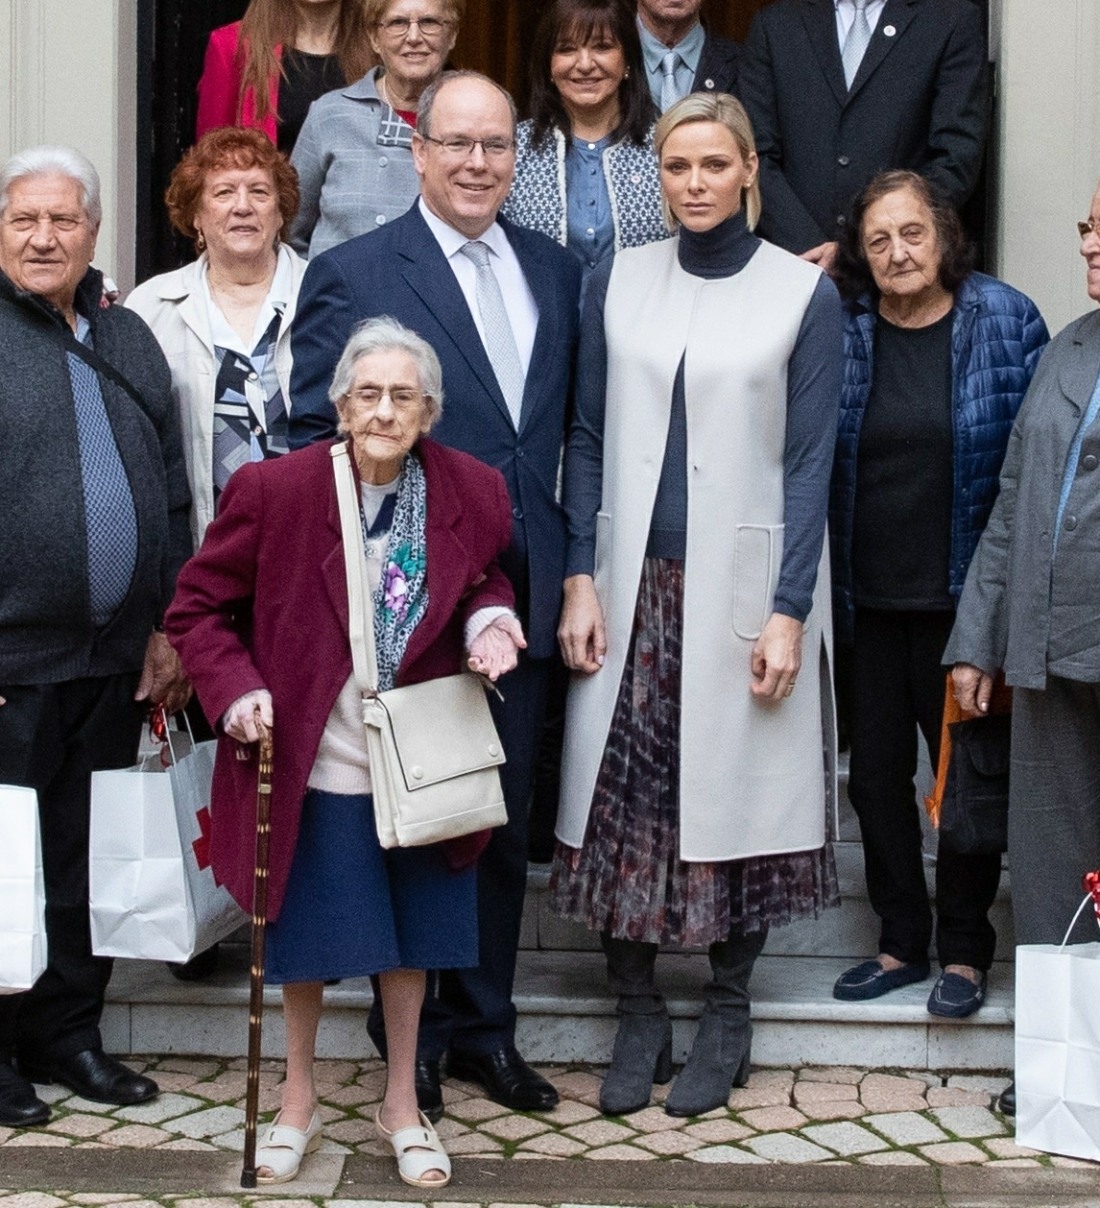 Prince Albert II and Princess Charlene of Monaco present gifts to the disadvantaged at the Monegasque Red Cross office